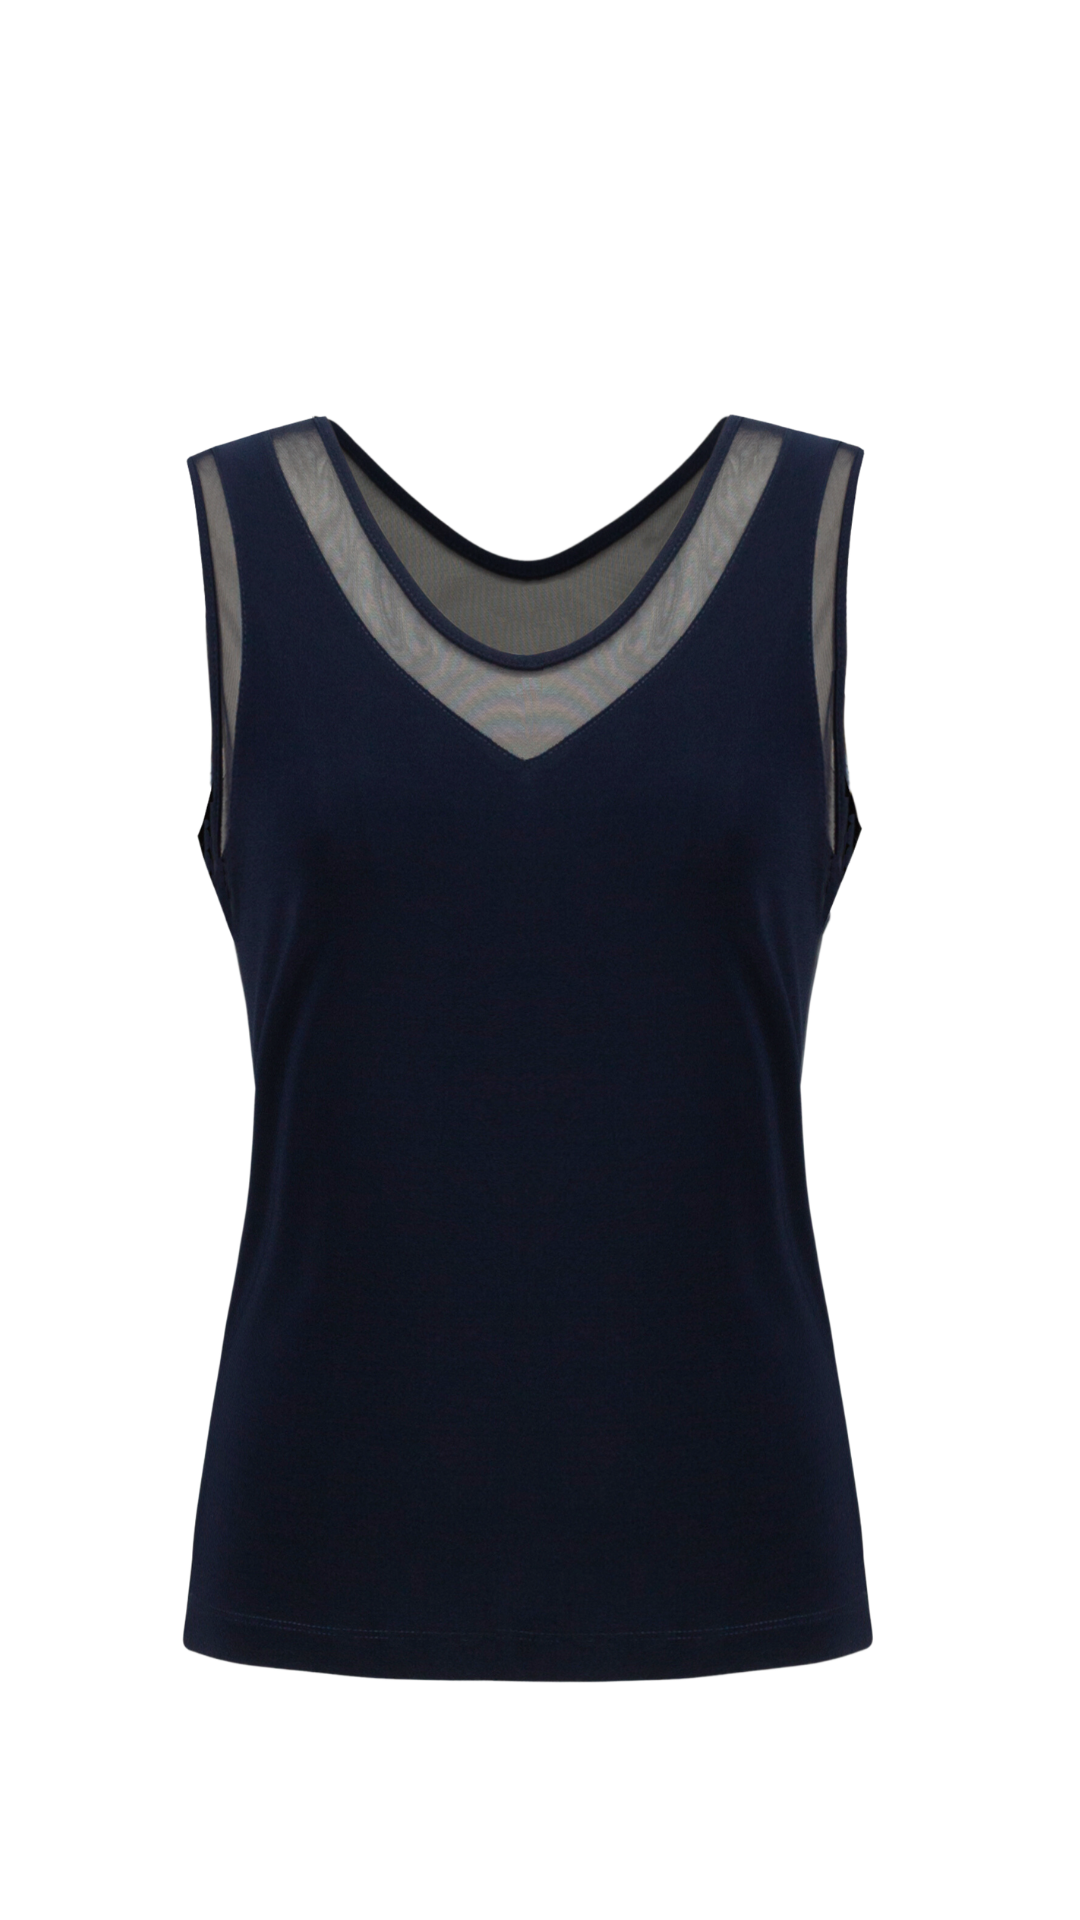 Silky Knit Mesh Trim Top in Midnight Blue or Black. Style JR232137